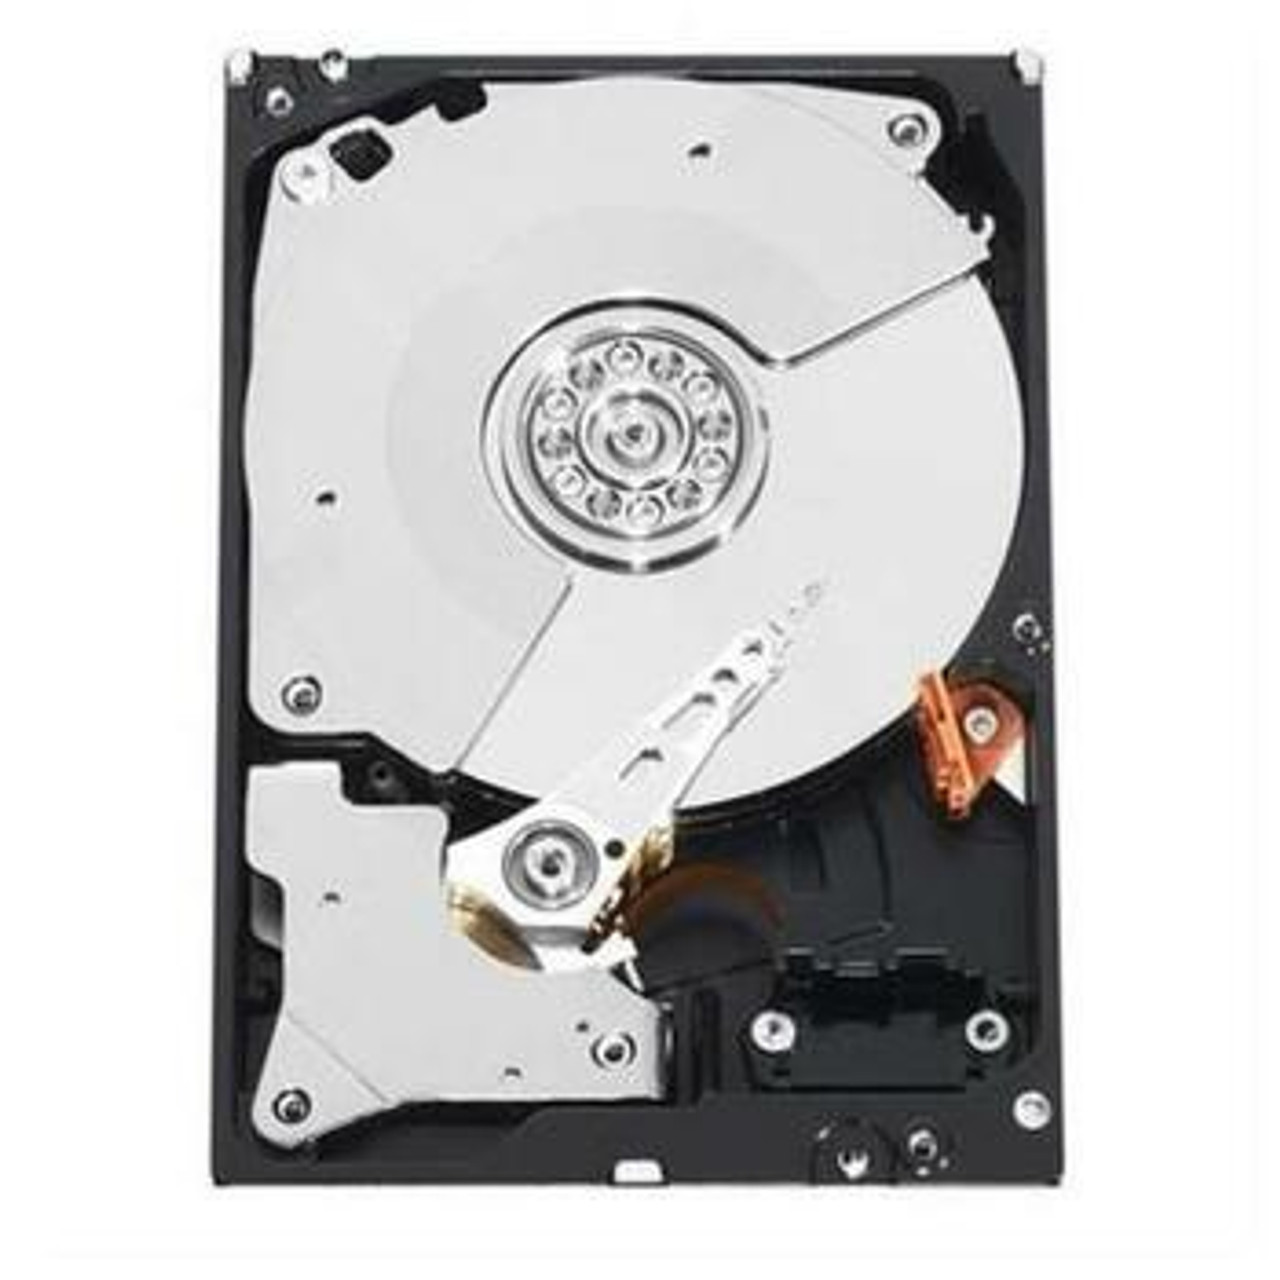 029MMM Dell 300GB 15000RPM SAS 12.0 Gbps 2.5 128MB Cache Hot Swap Hard Drive